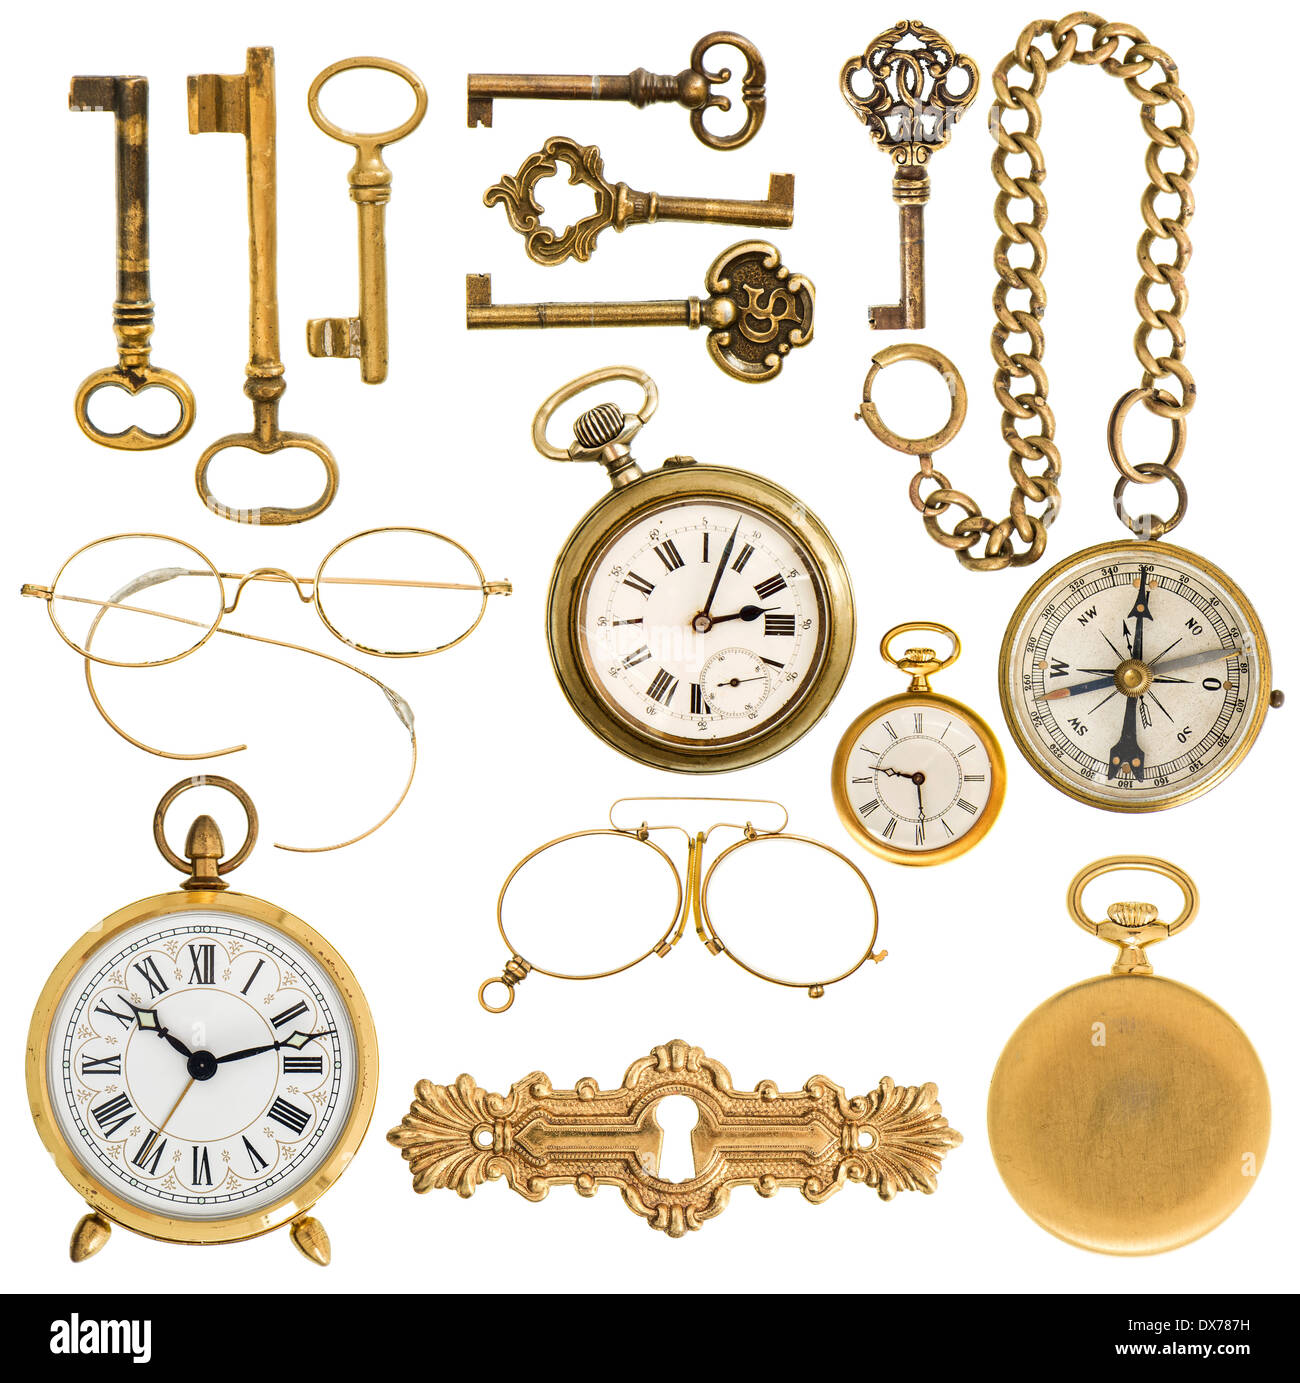 collection of golden vintage accessories. antique keys, clock, compass, glasses isolated on white background Stock Photo